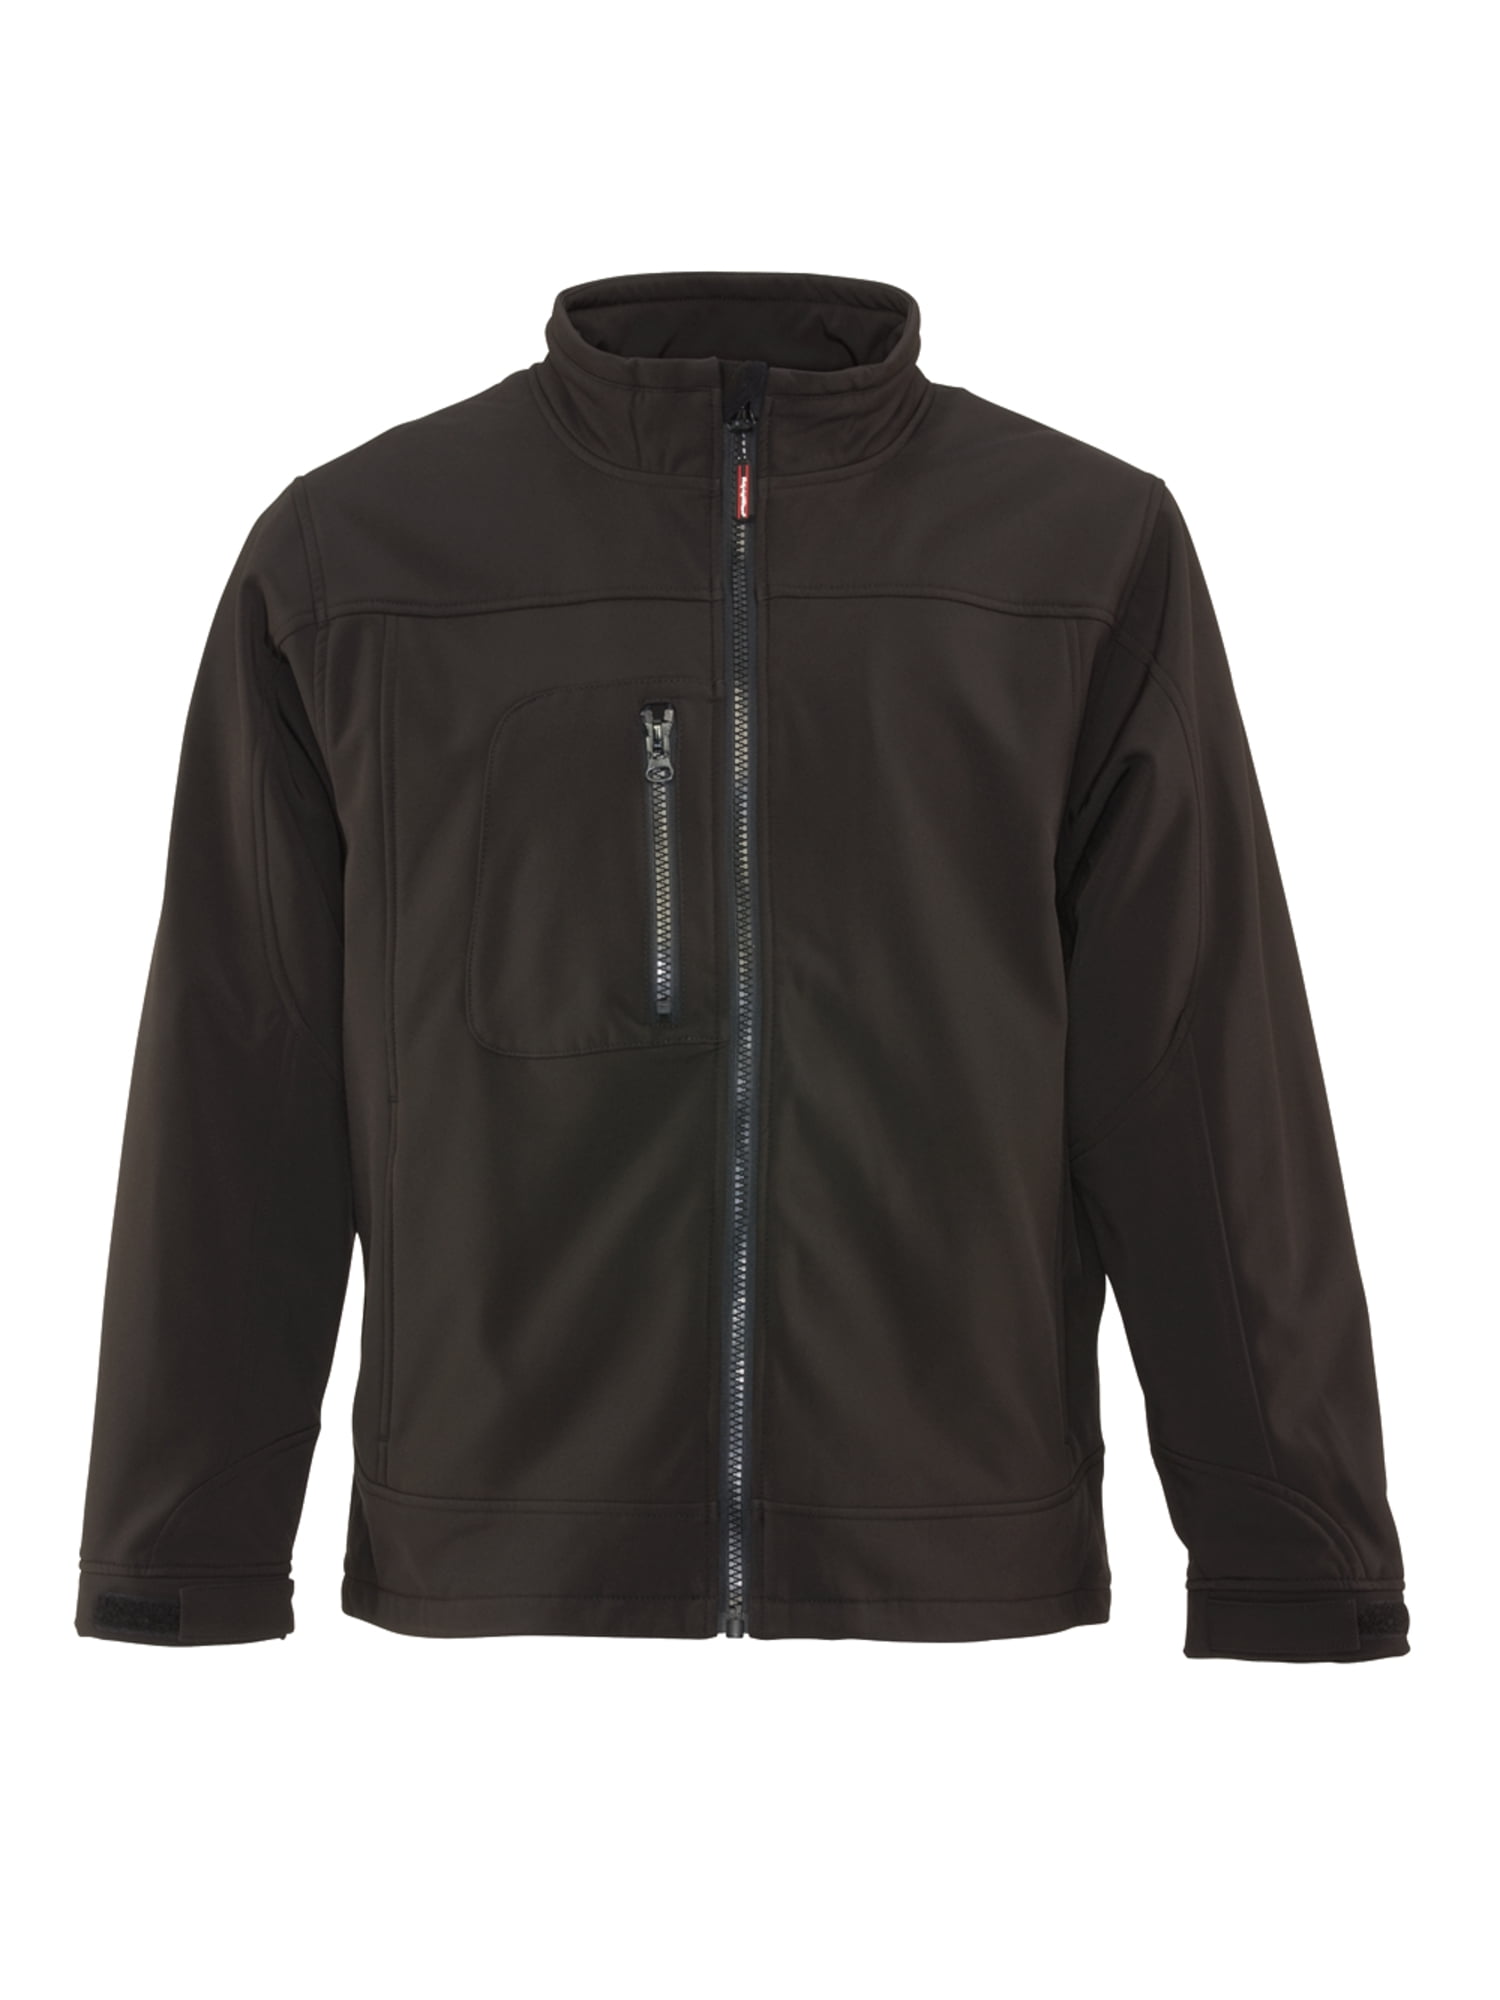 RefrigiWear Water-Resistant Insulated Softshell Jacket with Soft Micro-Fleece Lining